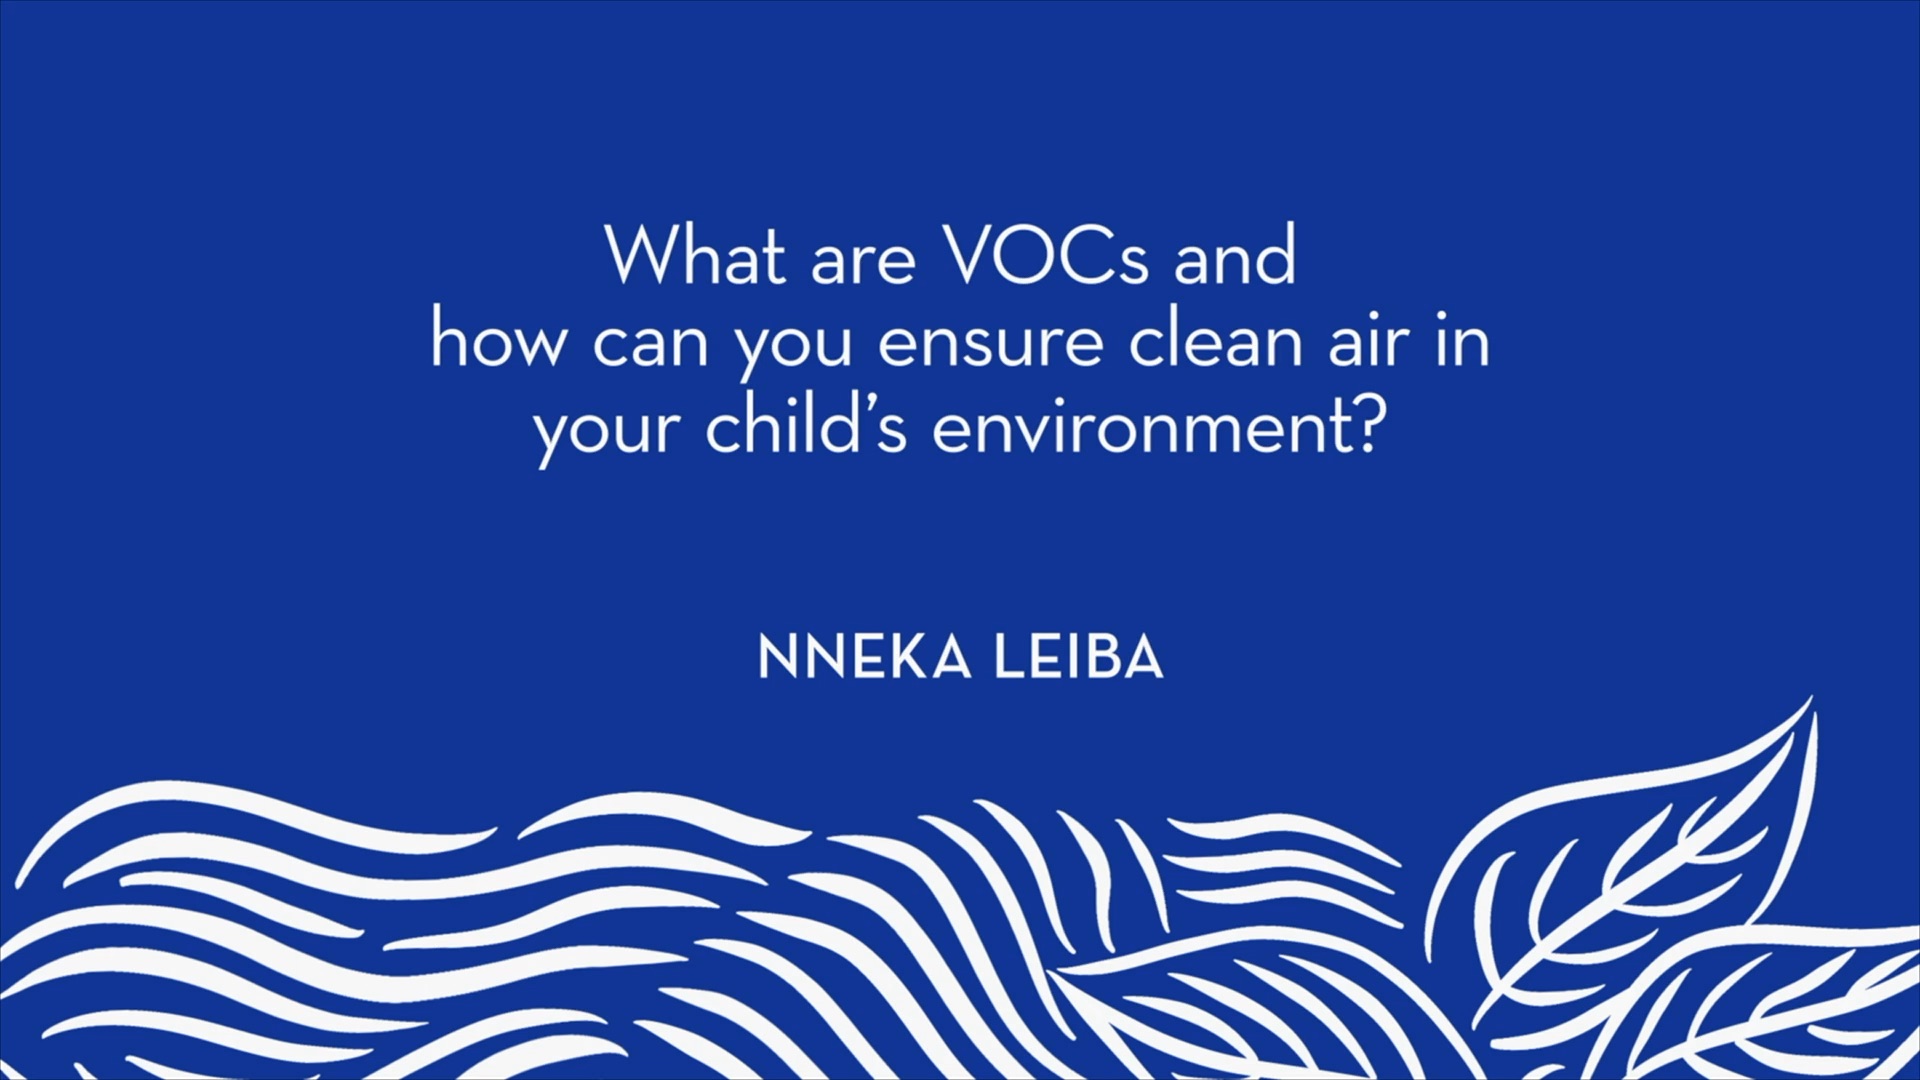 Nneka Leiba | What are VOCs and how can you ensure clean air in your child's environment?